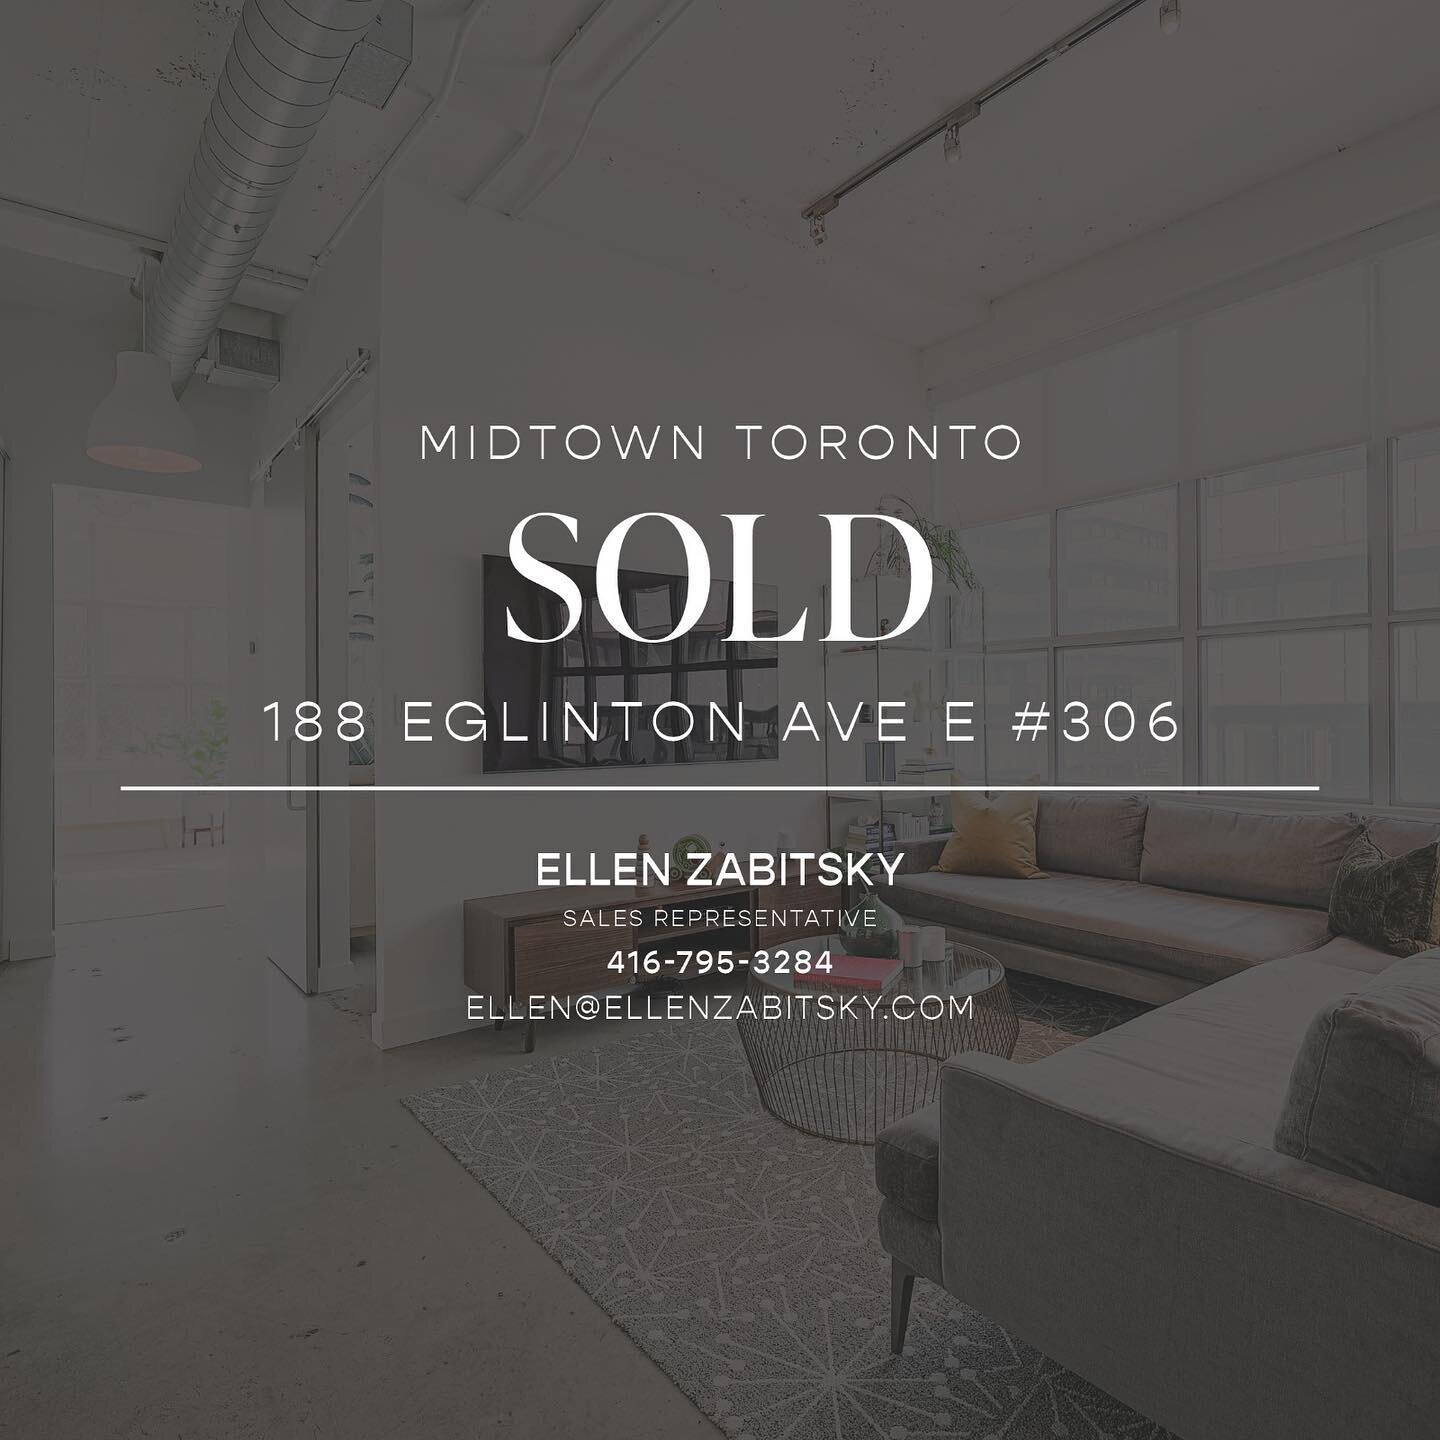 Quality never goes out of style, even in the toughest markets. This Super Loft at Yonge &amp; Eglinton was a winner from the get-go ✨

Looking to buy or sell, you know where to find me 📩

#torontorealestate #torontocondo #torontorealtor #luxuryrealt